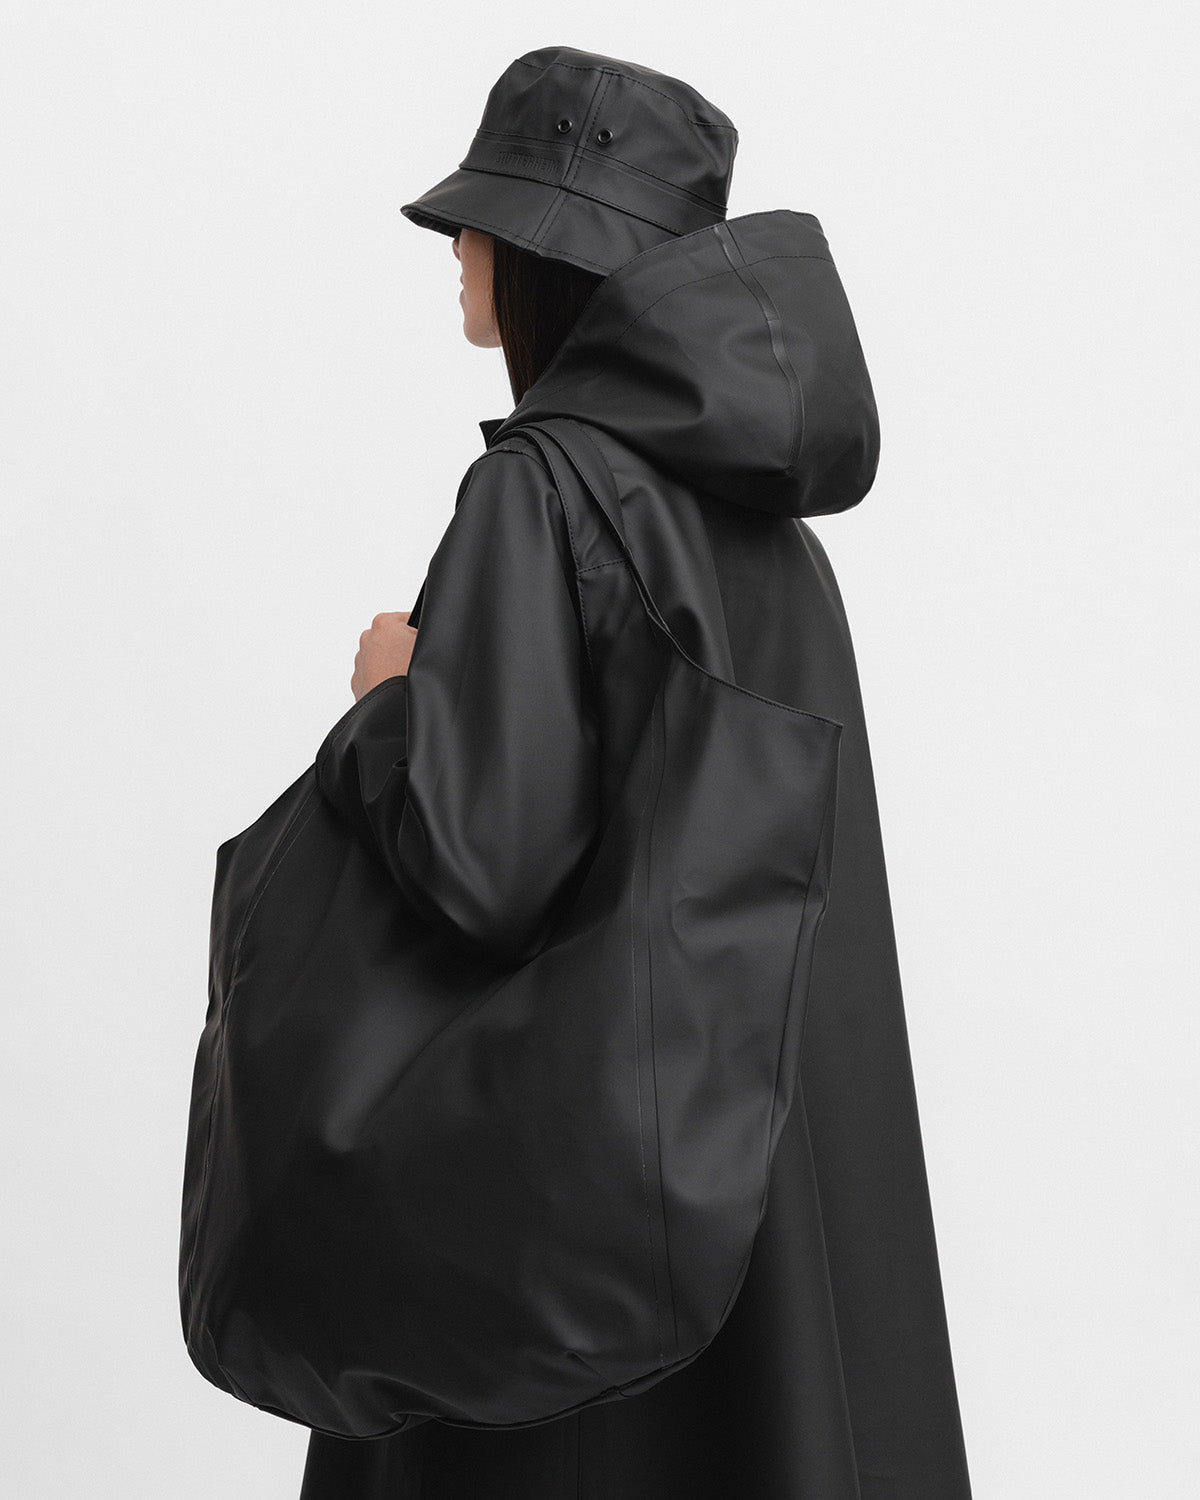 A woman with Tote Bag in color black by Stutterheim